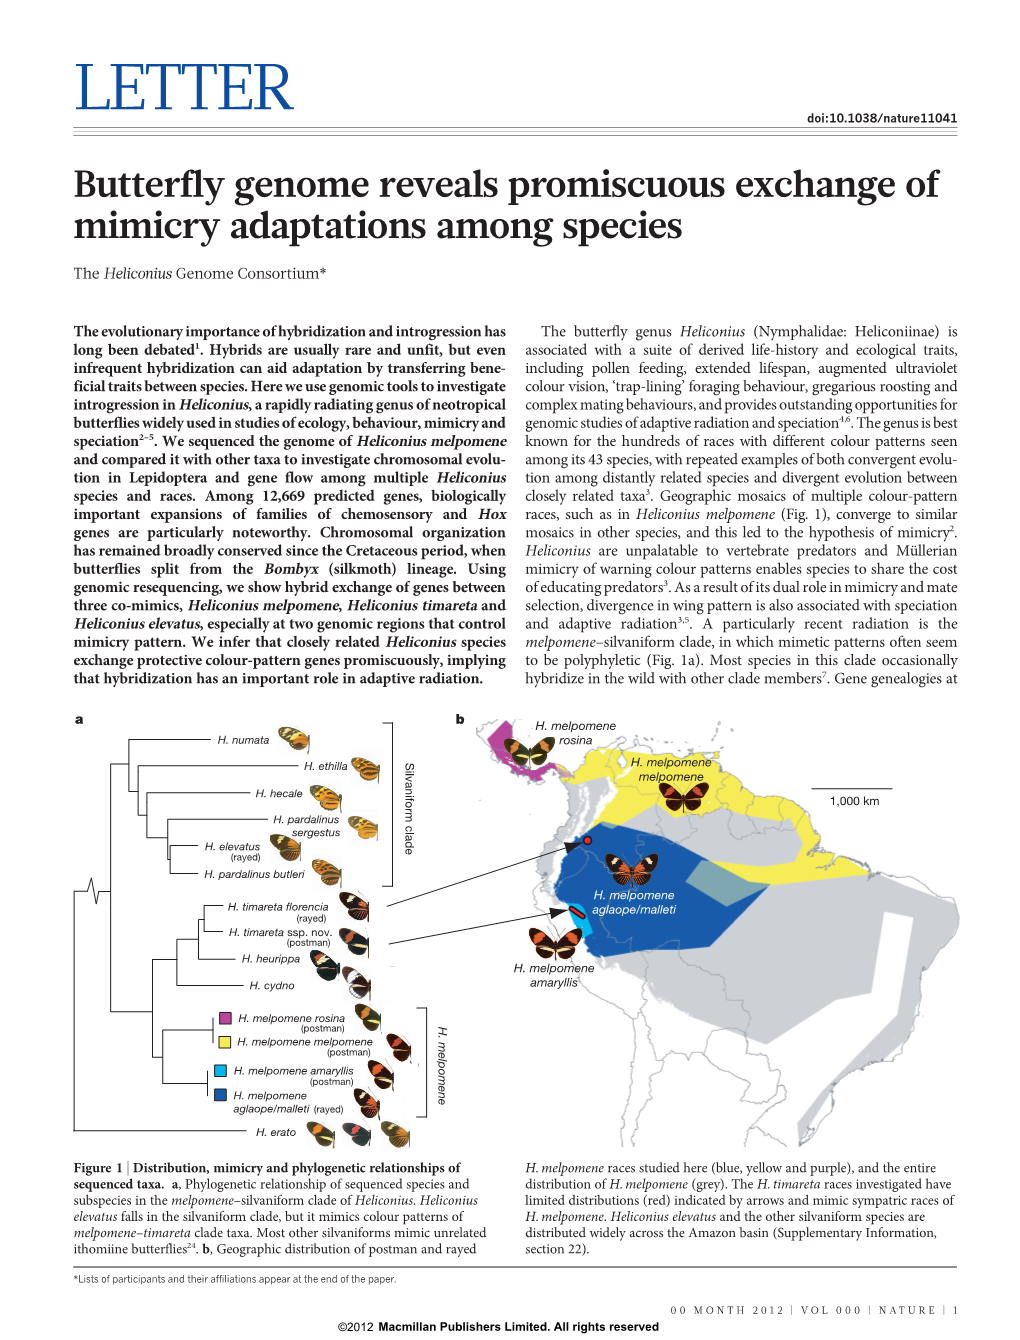 Butterfly Genome Reveals Promiscuous Exchange of Mimicry Adaptations Among Species